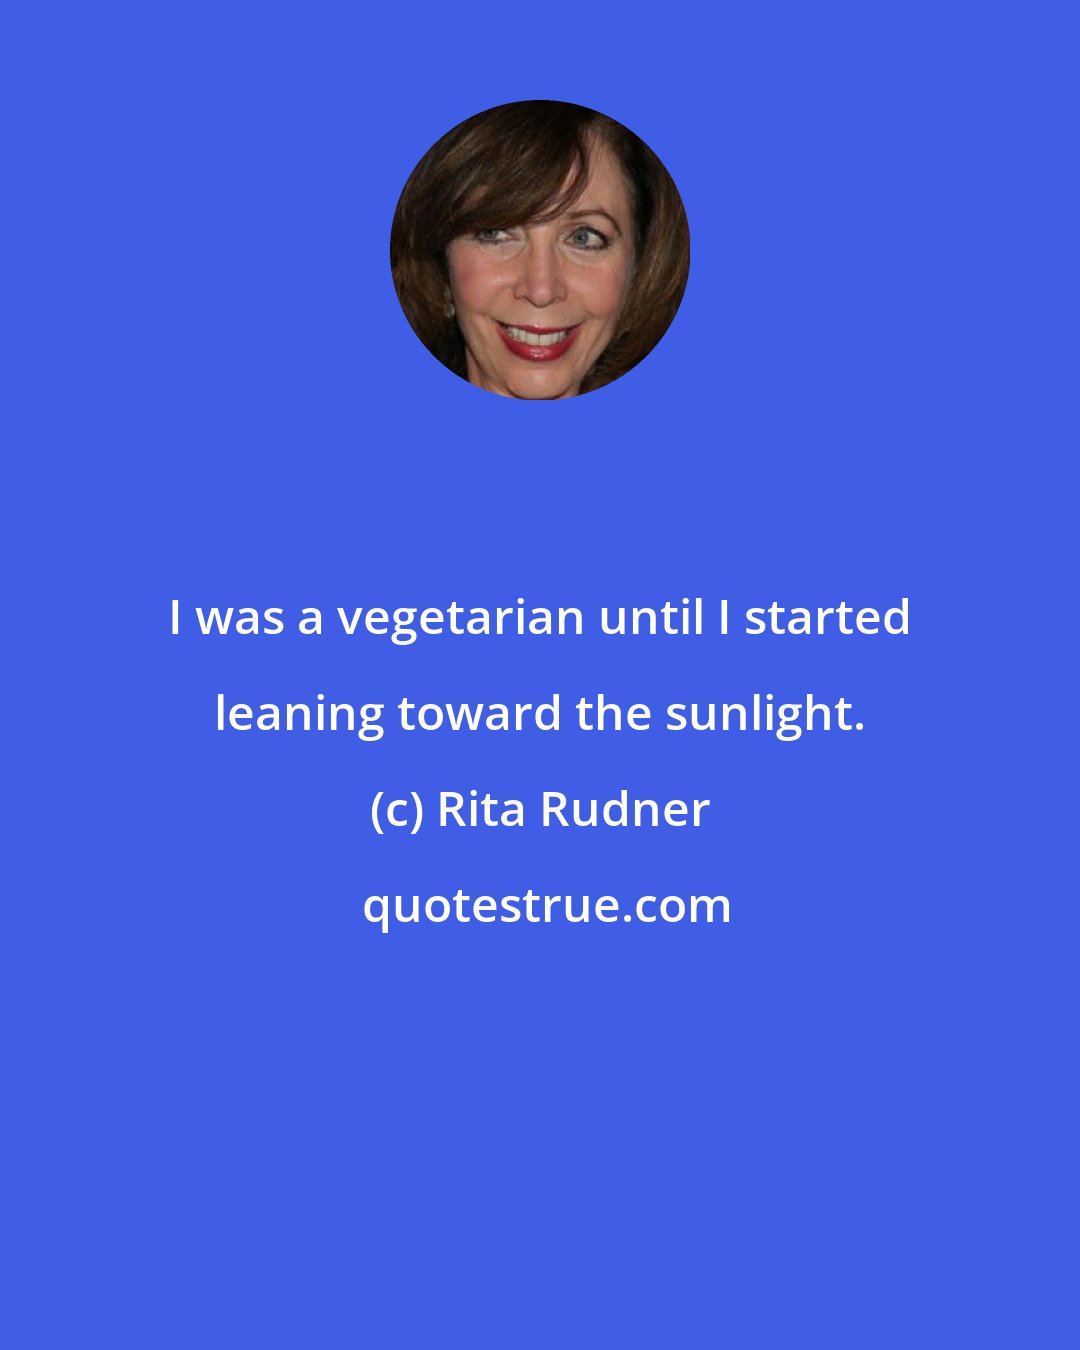 Rita Rudner: I was a vegetarian until I started leaning toward the sunlight.